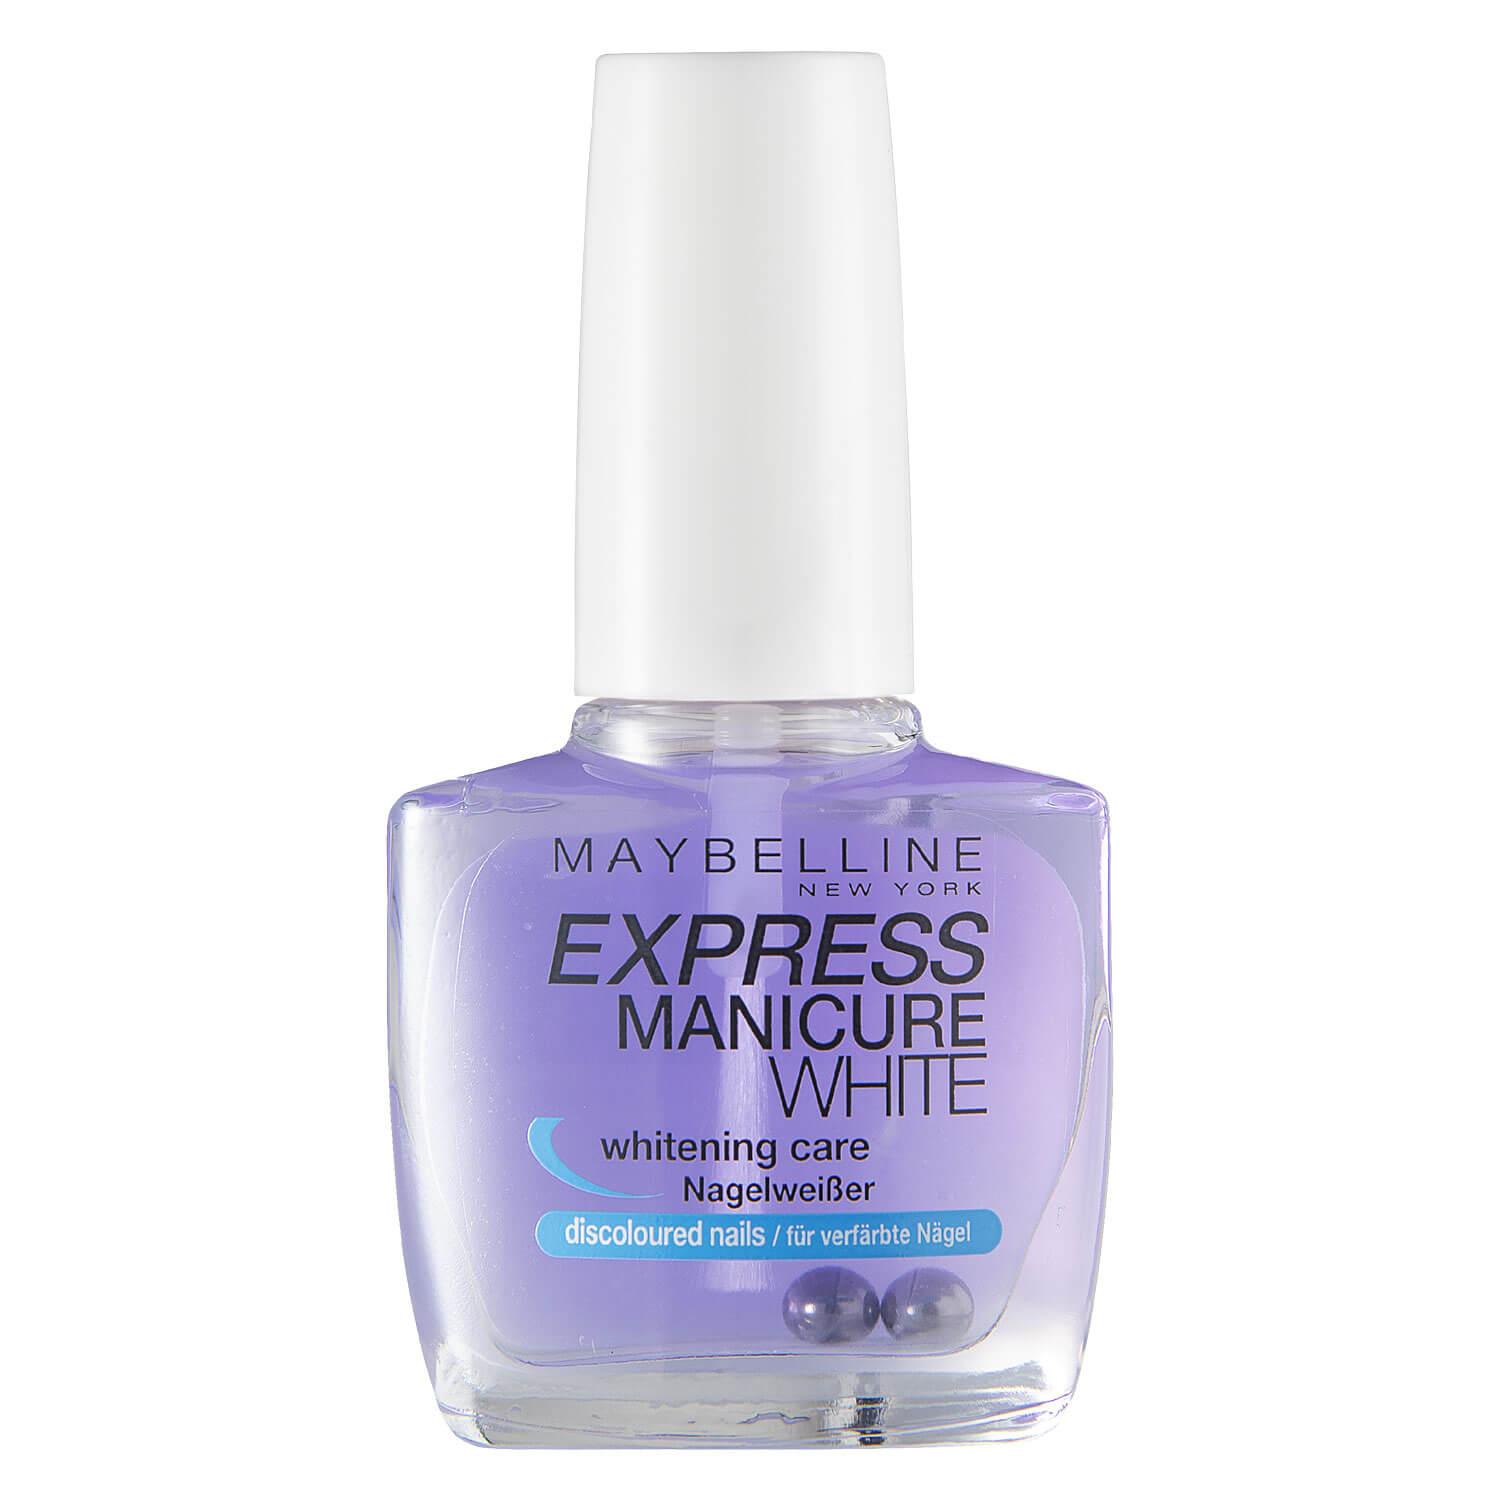 Maybelline NY Nails - Express Manicure Nagelweisser